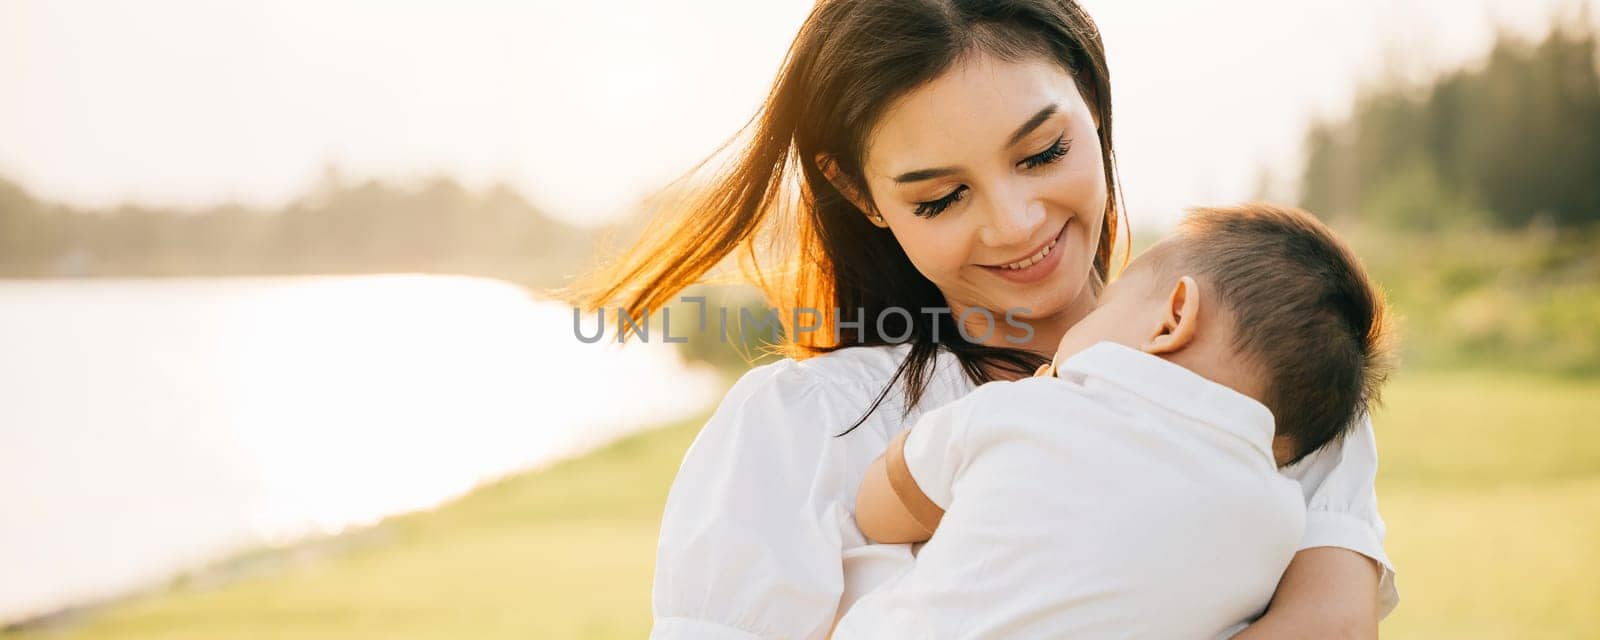 An intimate portrait of mother holding her sleeping baby in park at twilight. She smiles with pure joy, savoring tranquil moment in nature with newborn. heartwarming depiction of family care and love